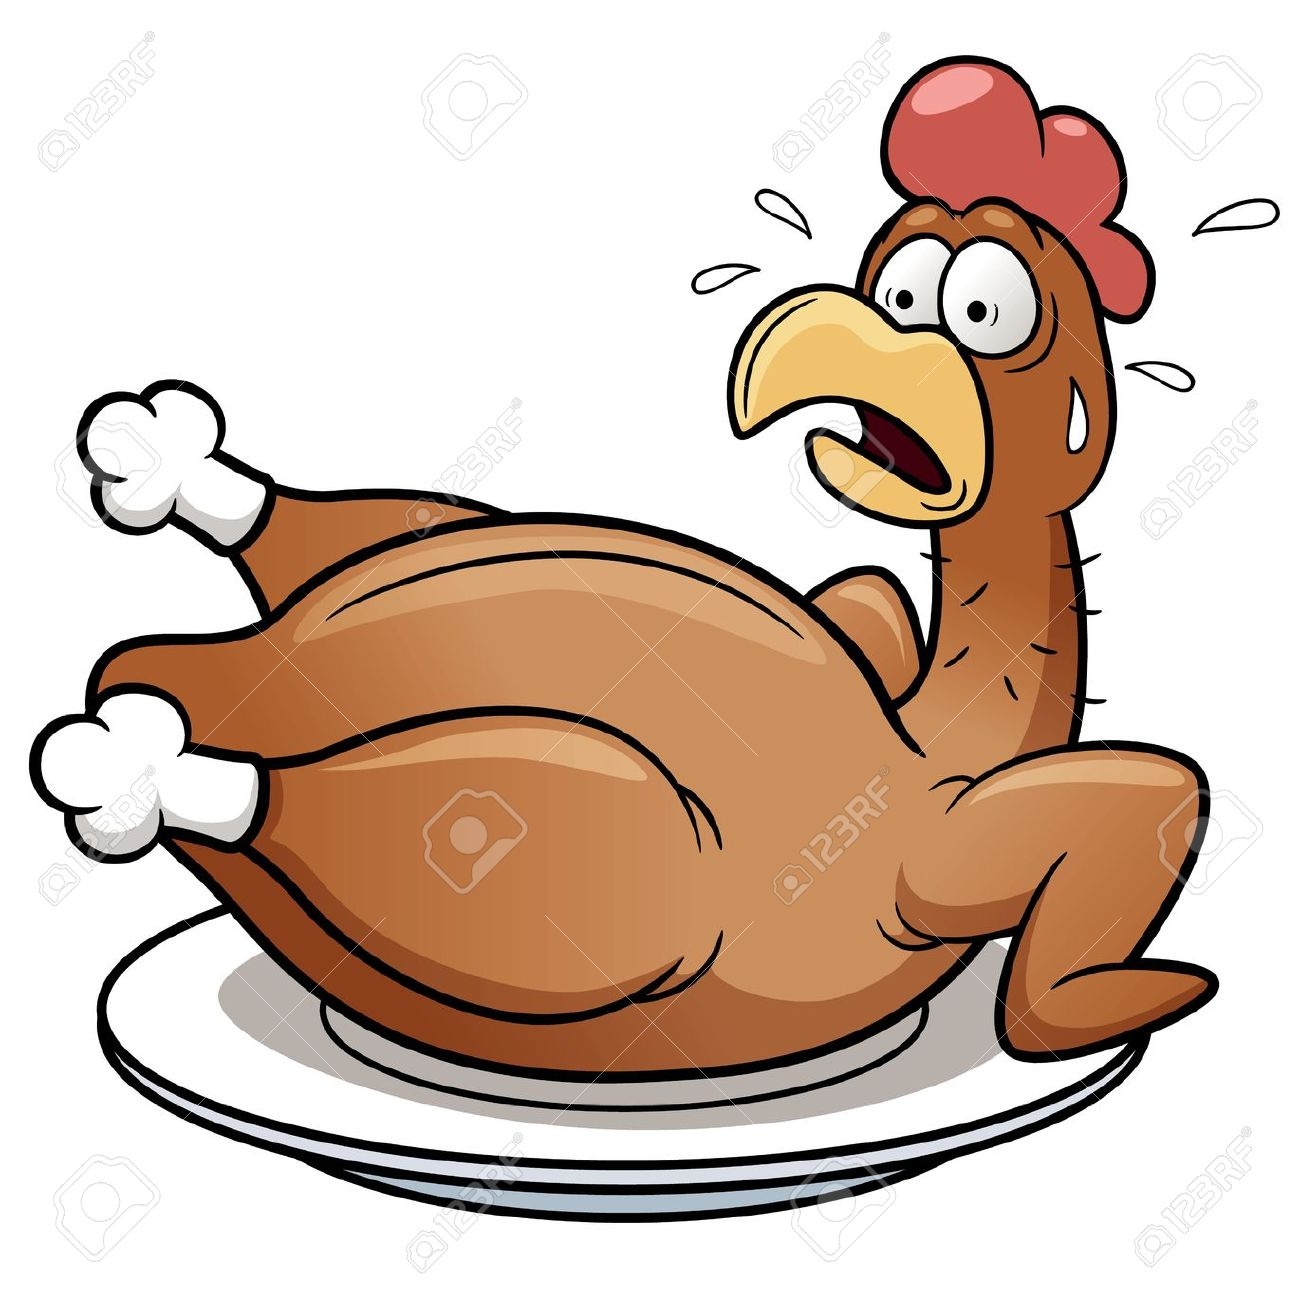 roasted chicken clipart free - photo #18